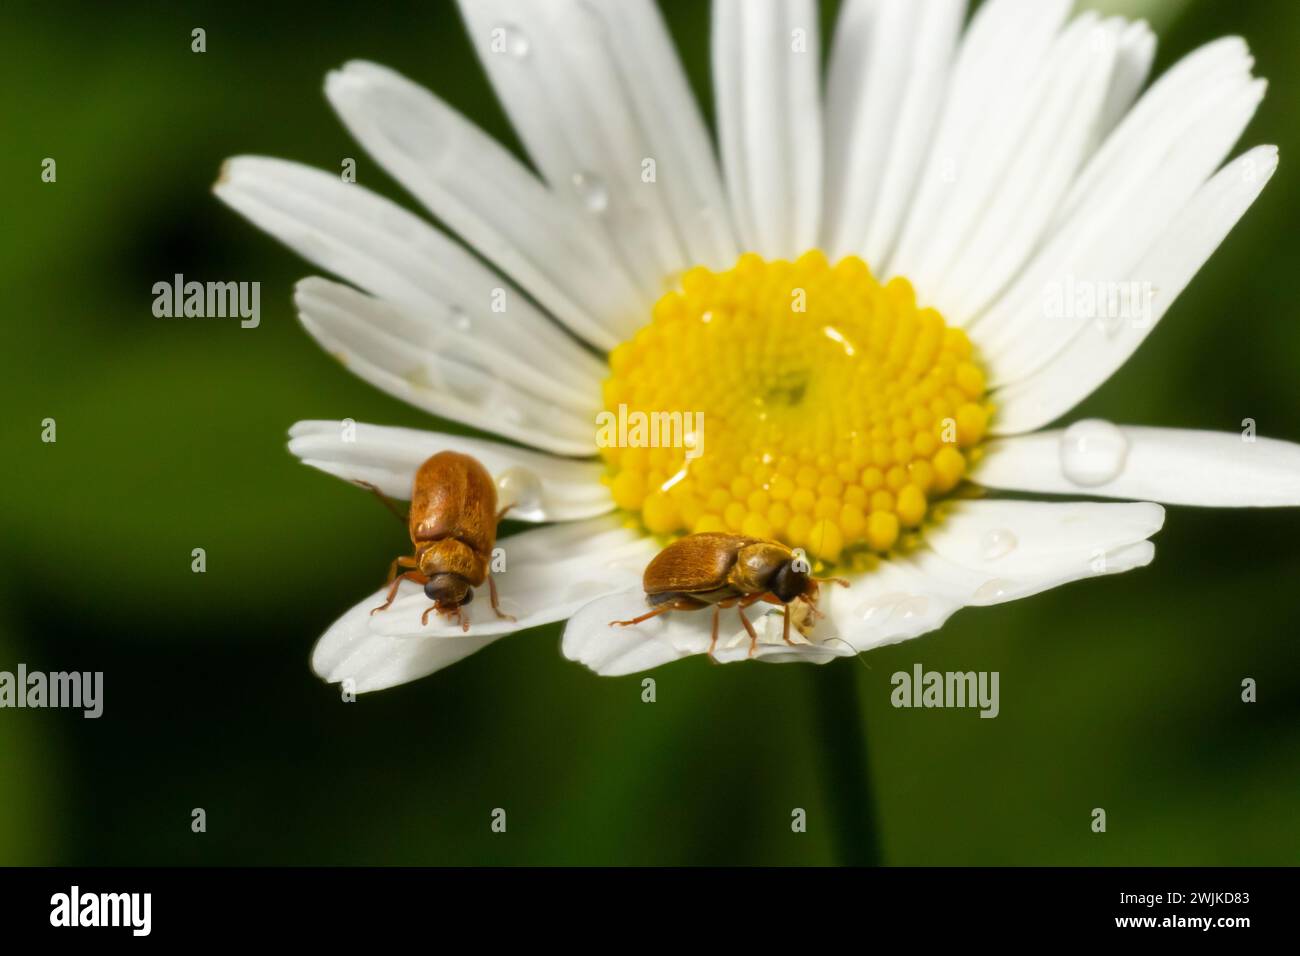 Raspberry beetle, Byturus tomentosus, on a chamomile flower. These are beetles from the fruit worm family Byturidae, the main pest that affects raspbe Stock Photo